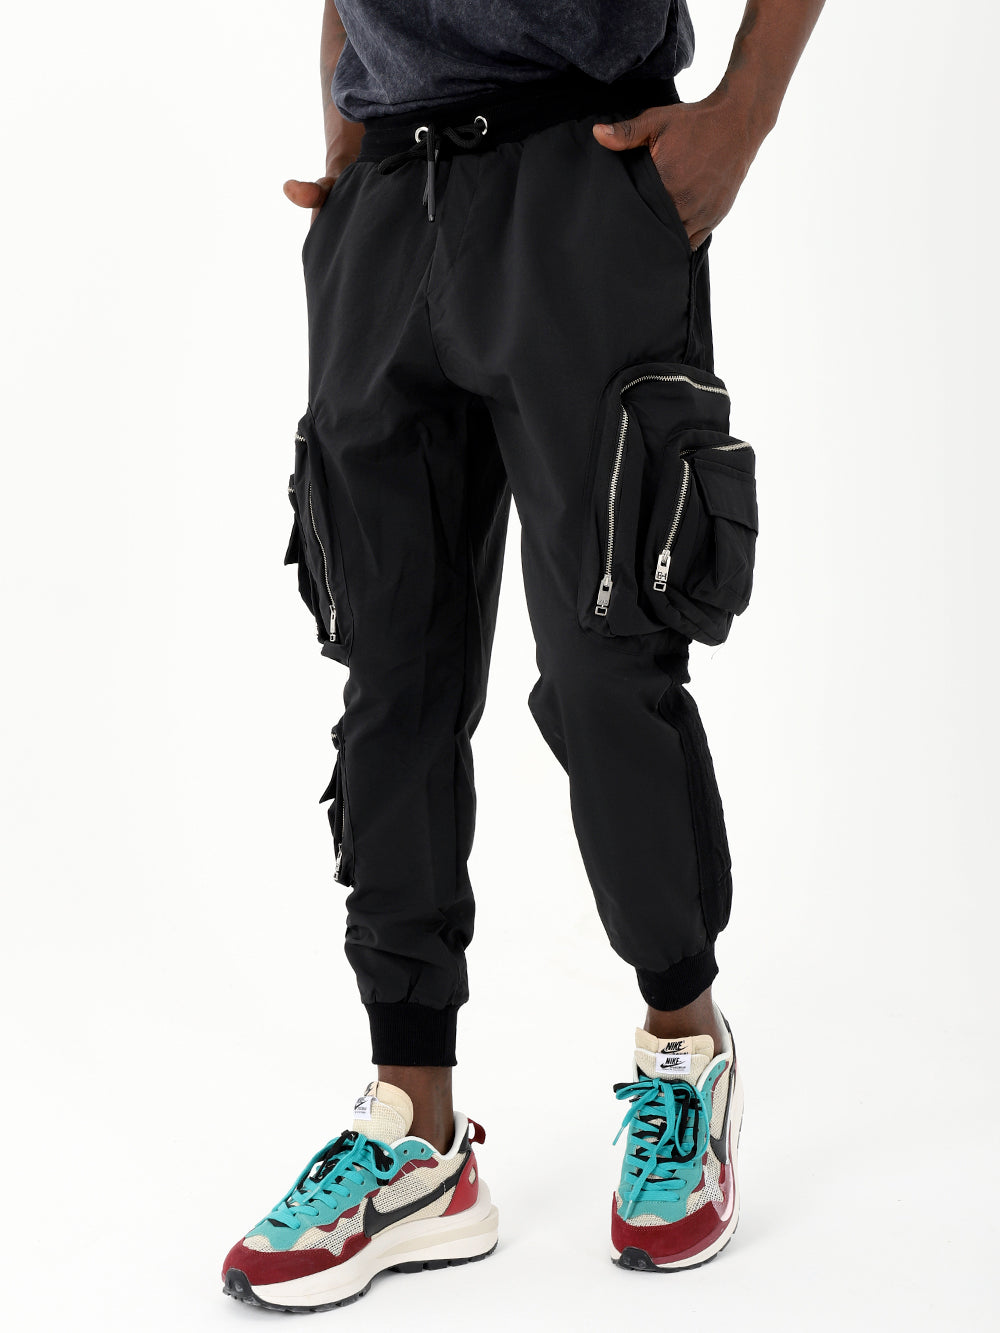 A man wearing black LAVANO JOGGERS and sneakers.